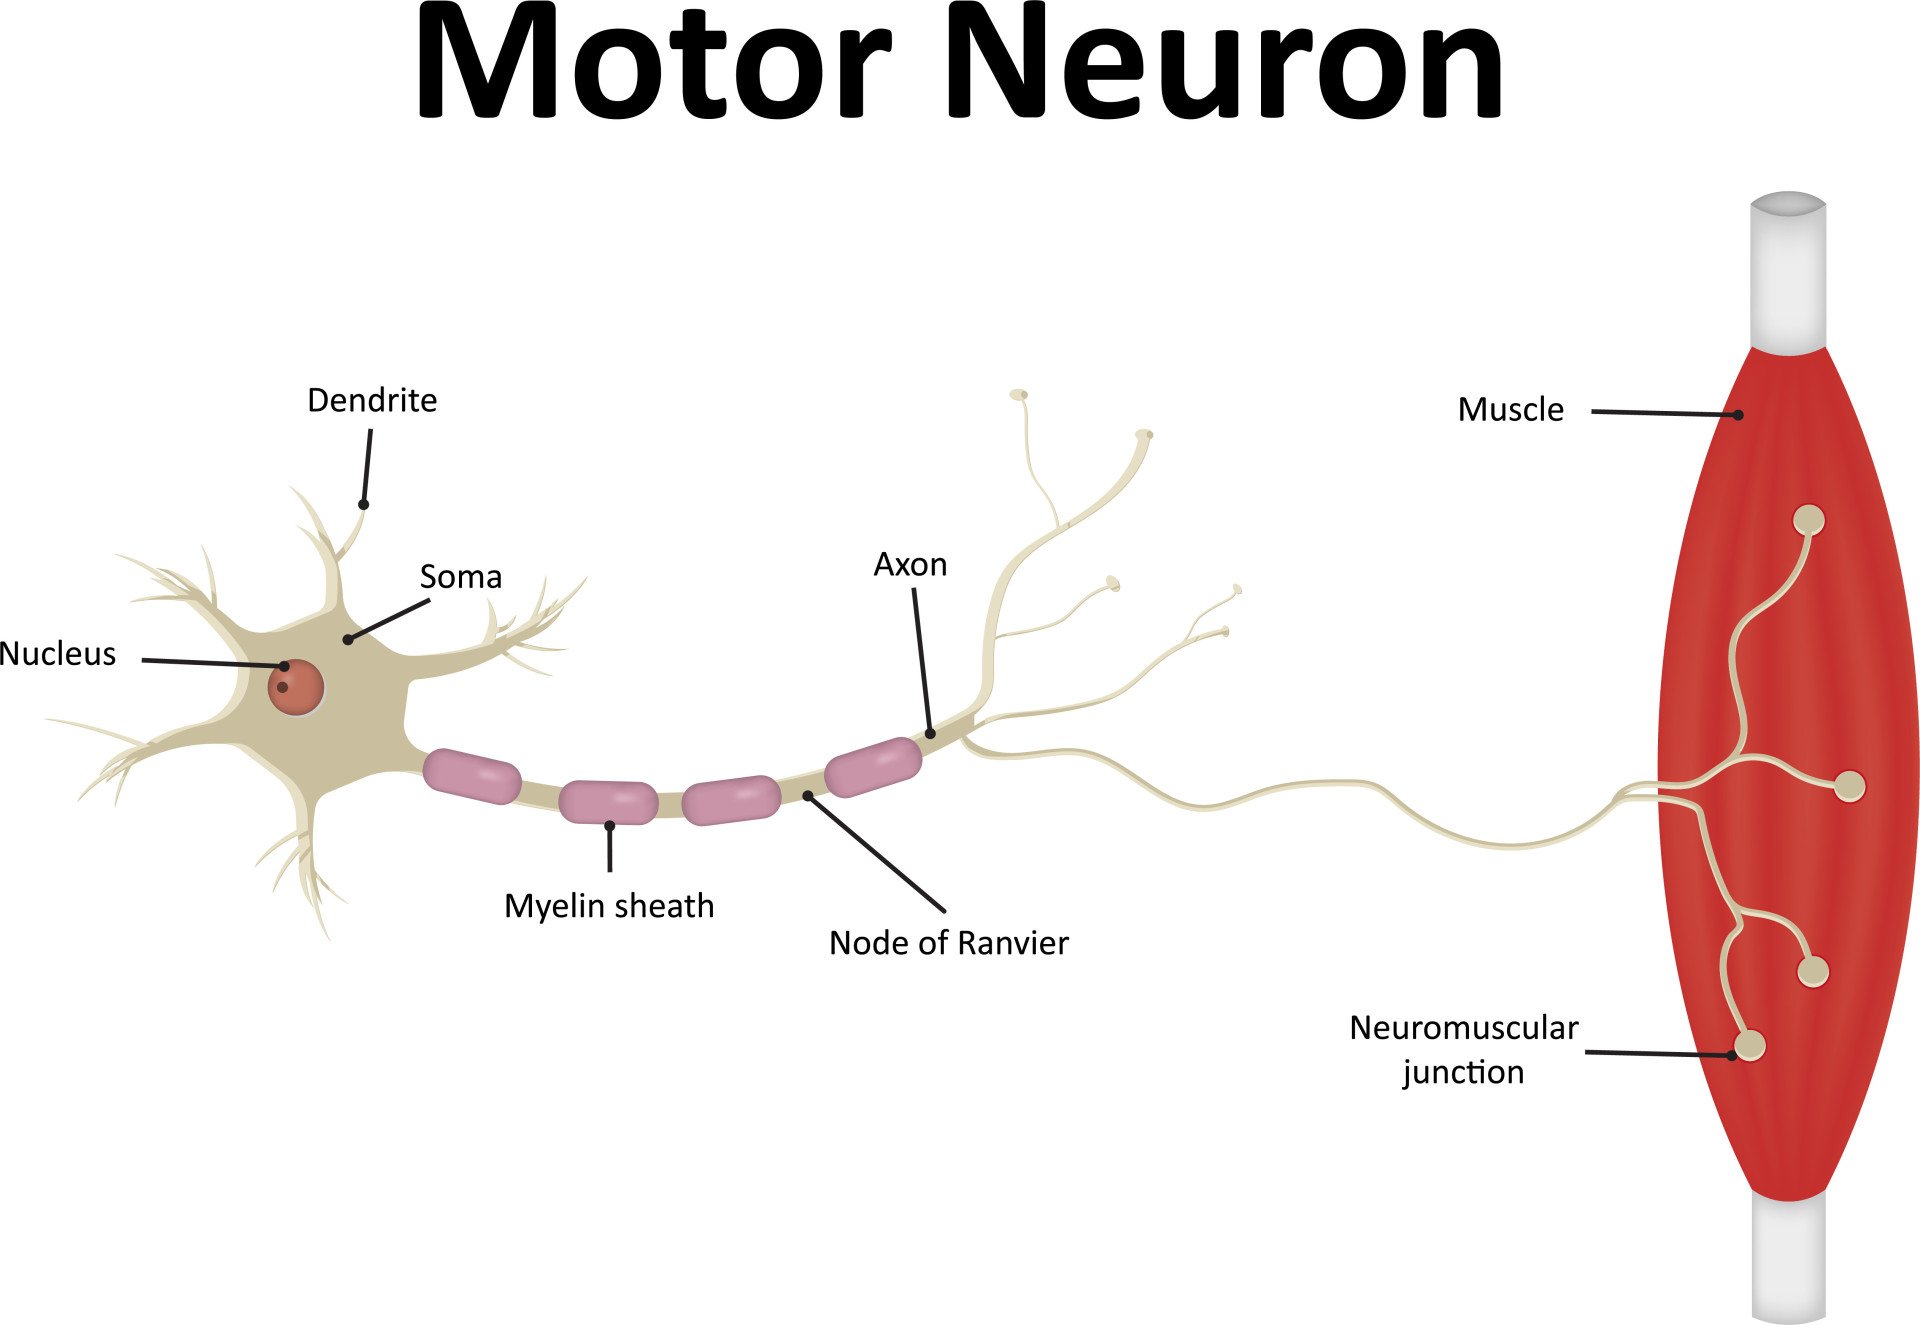 Motor Neurone Labeled